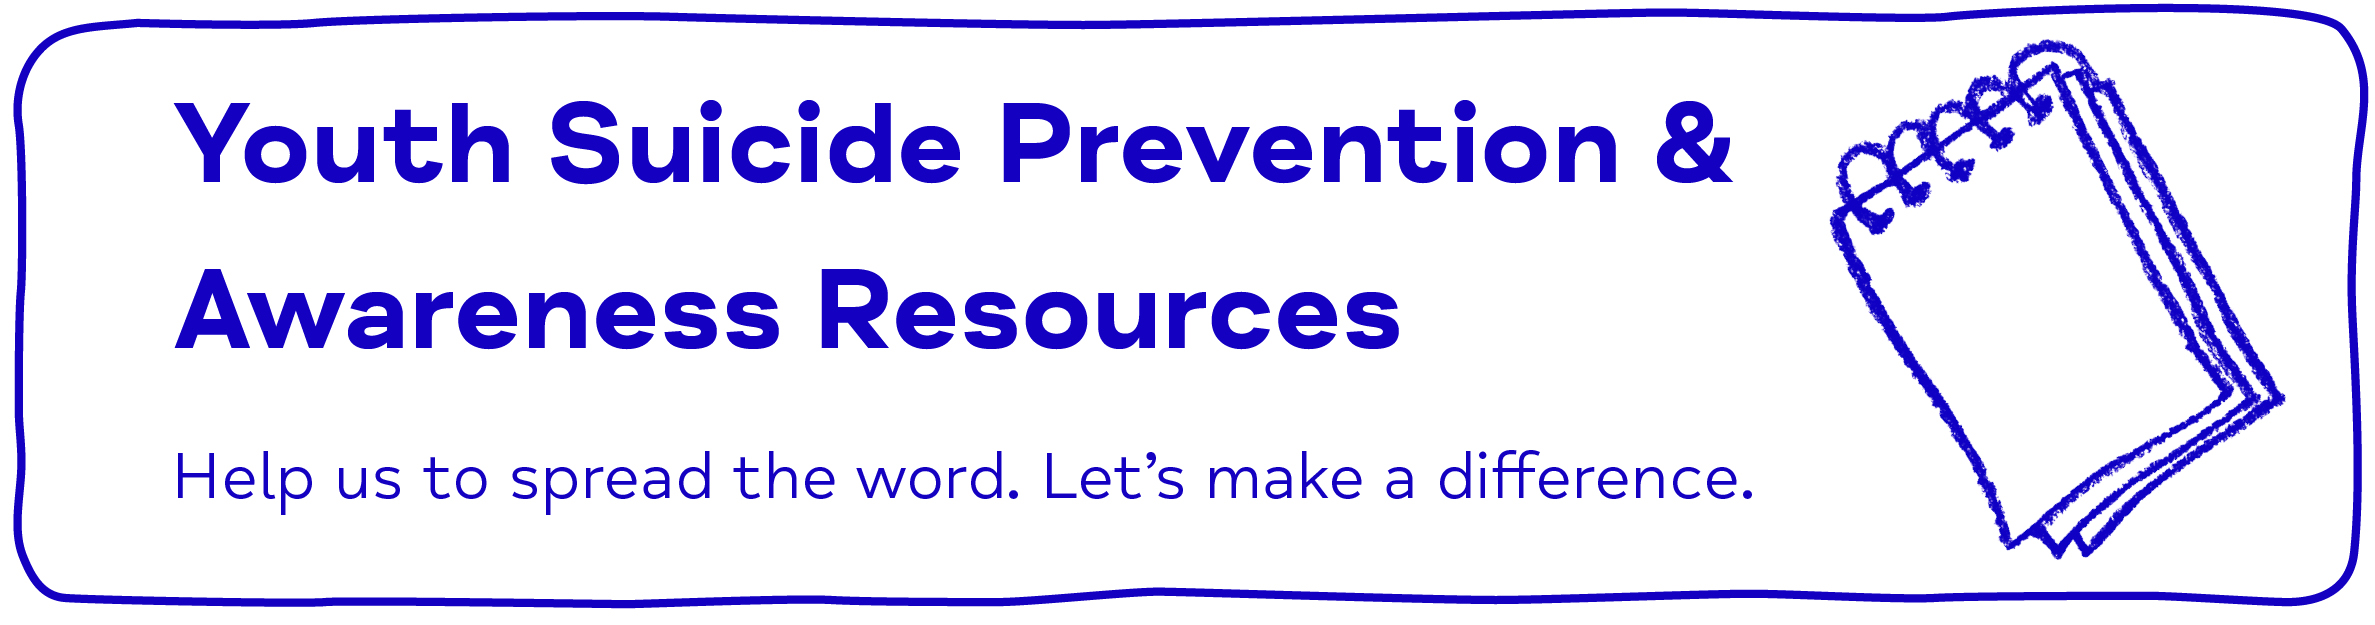 Youth Suicide Prevention & Awareness Resources Help us to spread the word. Let’s make a difference.